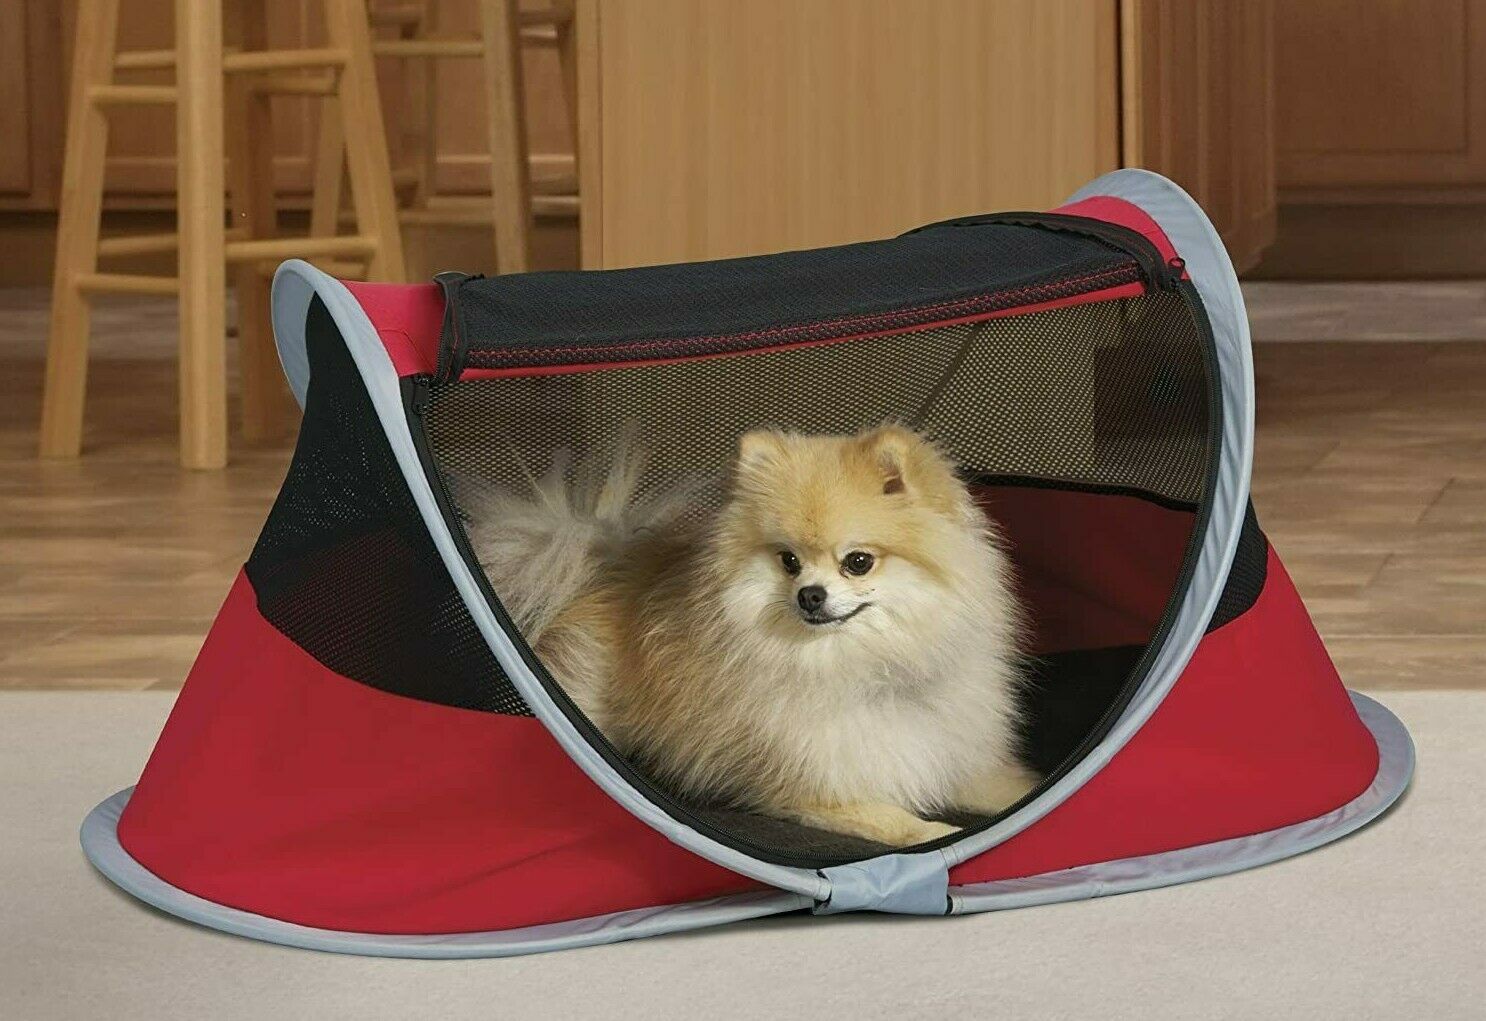 Folding Soft Dog Crate Pet Kennel Crate- Pop-up Bed Indoor and Outdoor Pet House Cot Portable -Great for Travel